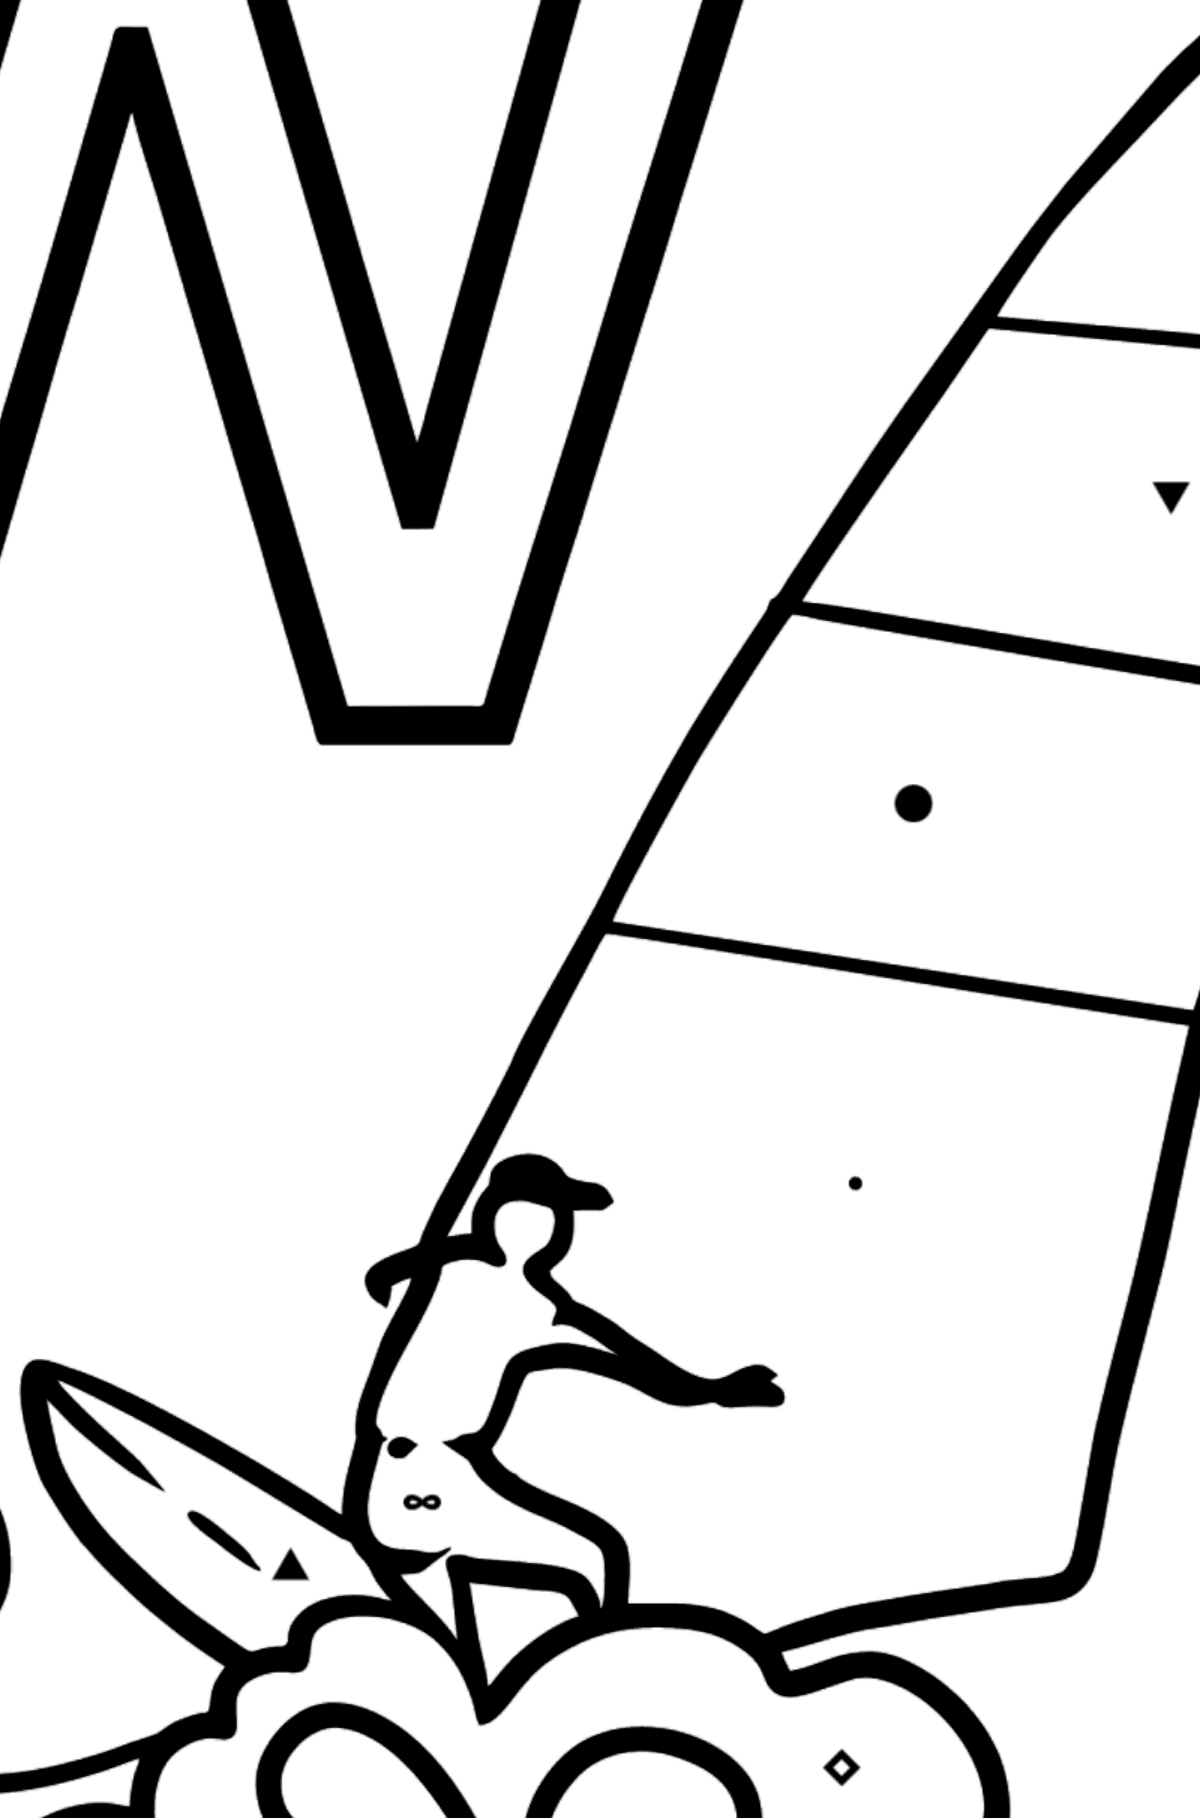 Spanish Letter W coloring pages - WINDSURF - Coloring by Symbols for Kids